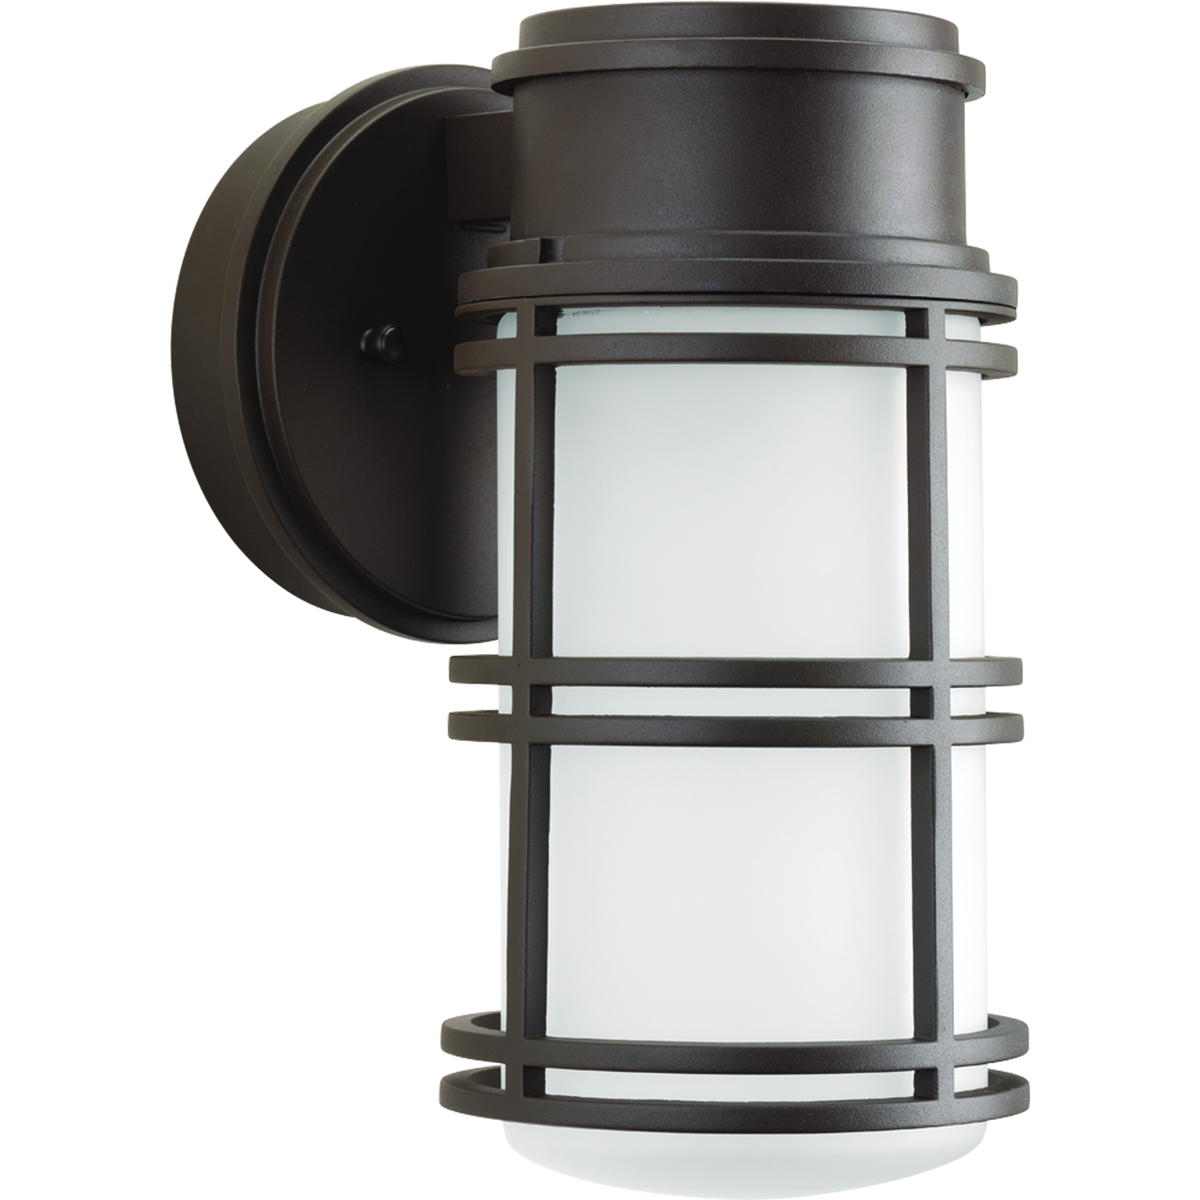 The one-light wall lantern from the Belle LED Collection features nautical undertones and a cage reminiscent of industrial spaces that is ideal for both interior and exterior settings. This fixture is available in convertible ceiling/pendant and wall mount options. Small LED wall lantern. Antique Bronze finish.